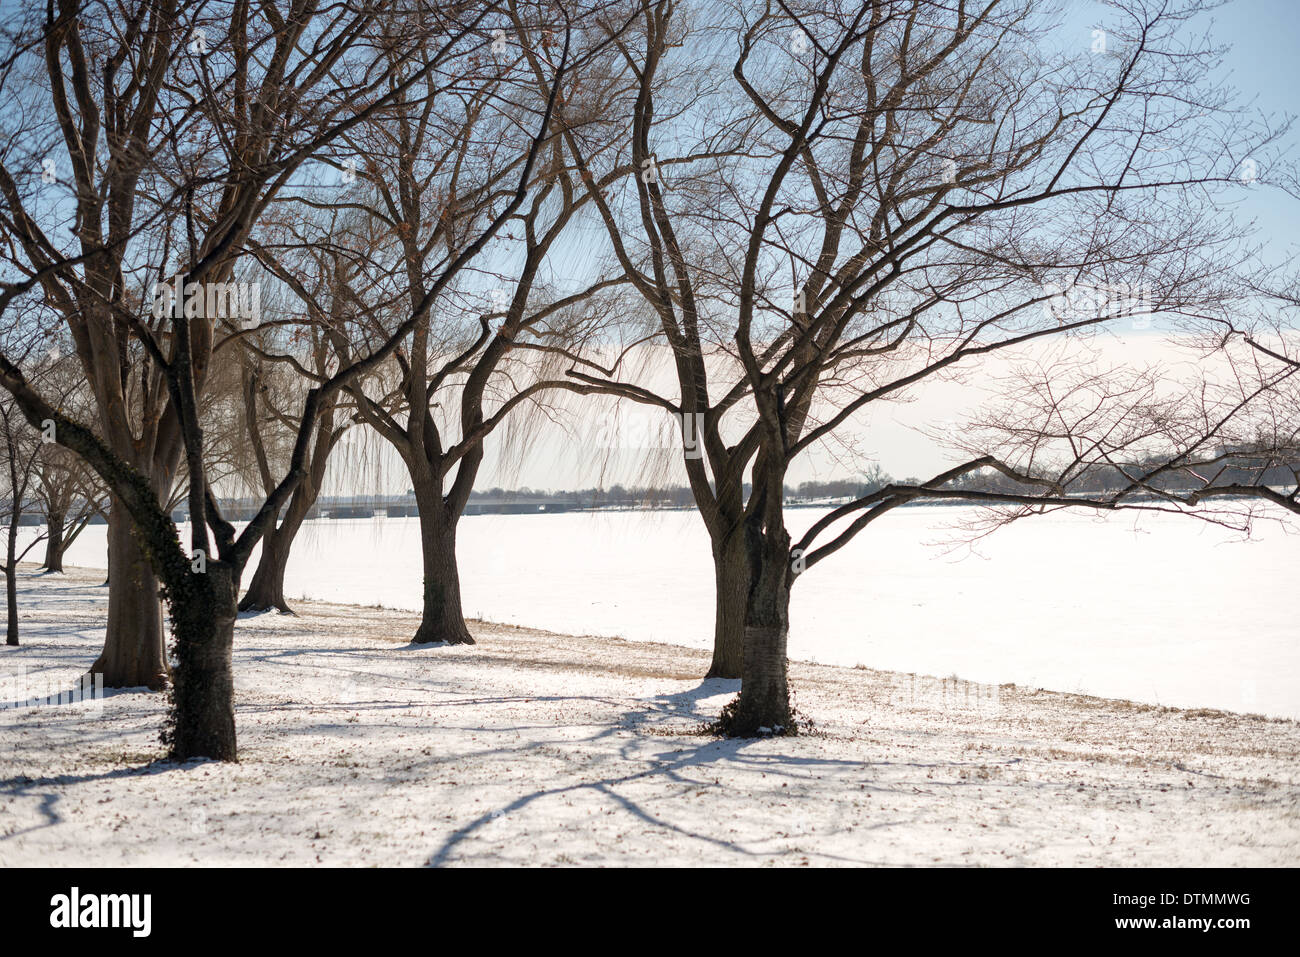 WASHINGTON DC, USA - The Potomac running through Washington DC is frozen and covered with a layer of snow. The region has experienced an unusually cold winter, with sustained low temperatures. Stock Photo